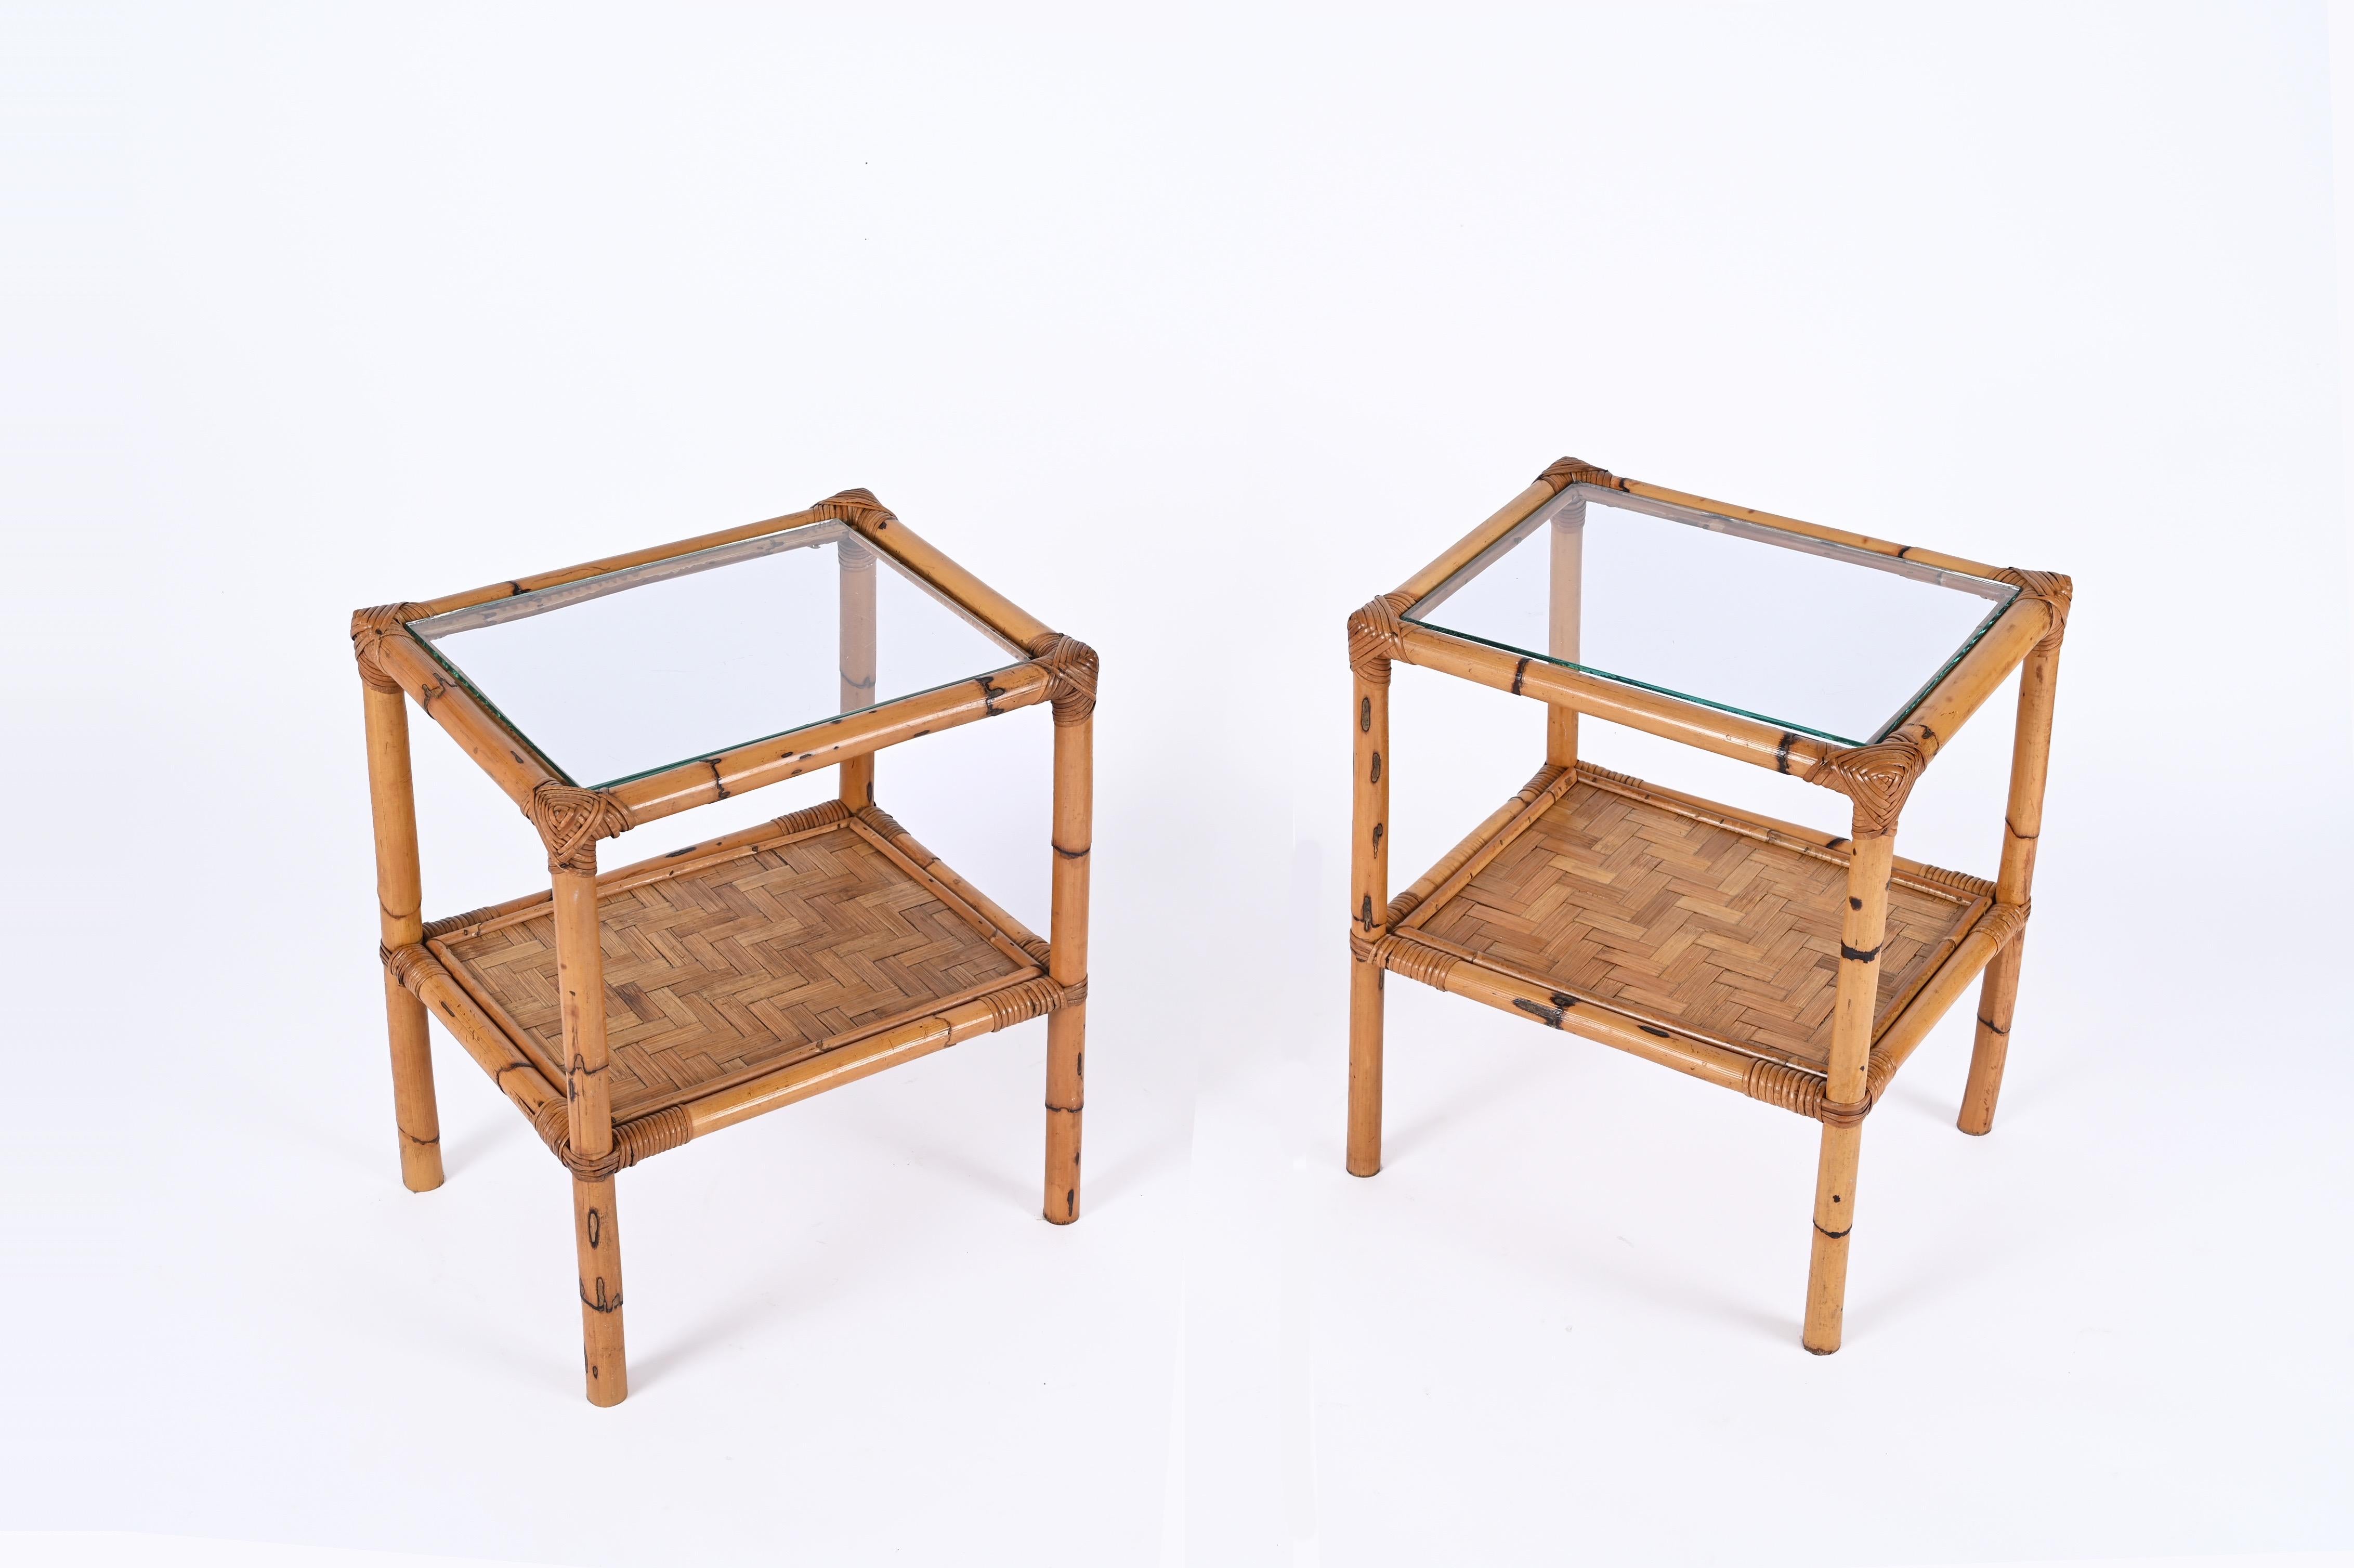 Pair of Mid-Century Italian Bedside Tables in Bamboo, Rattan and Glass, 1970s For Sale 5